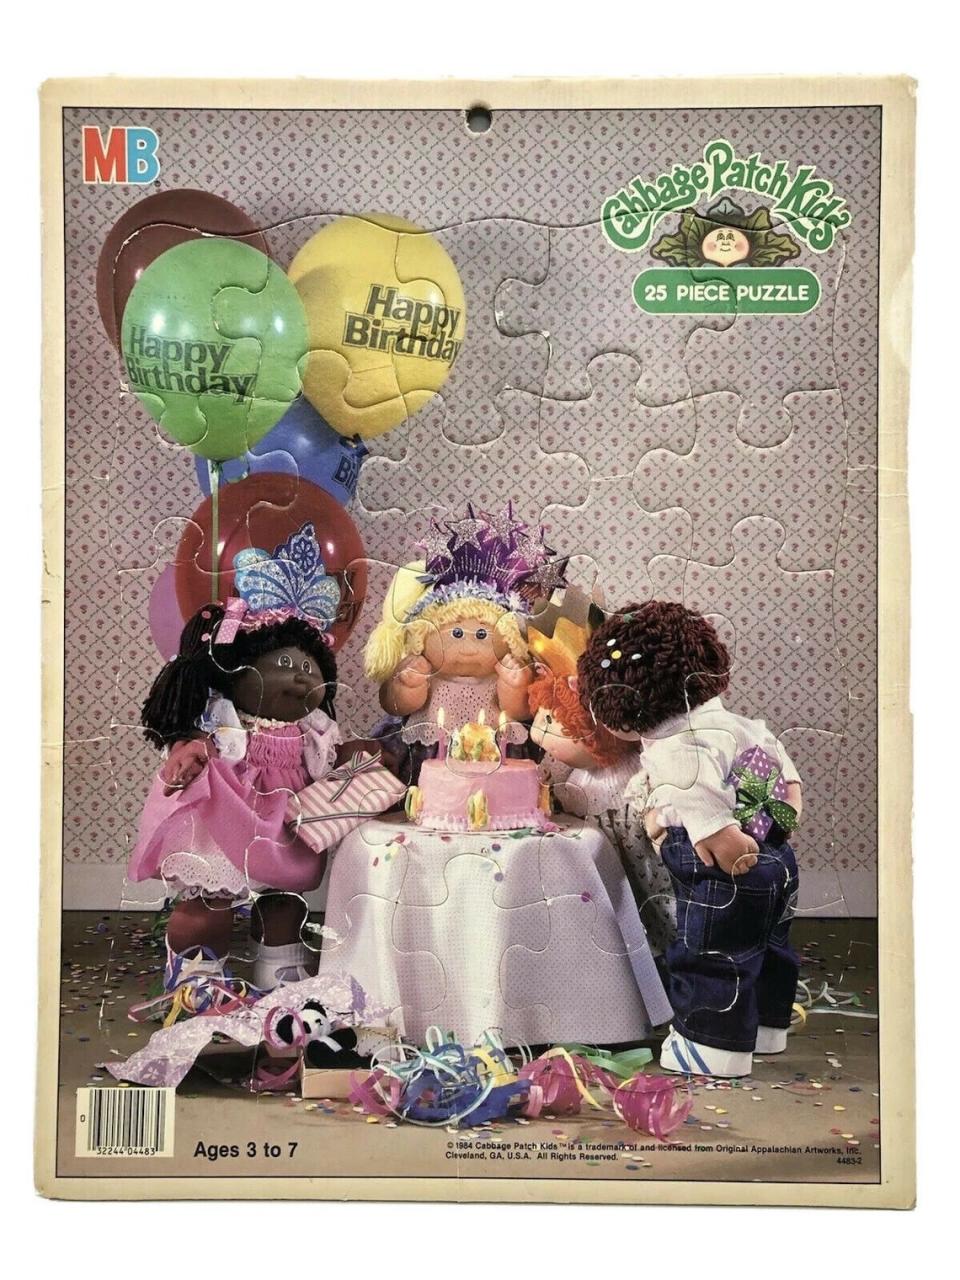 A puzzle of Cabbage Patch Kids dolls blowing candles on a birthday cake